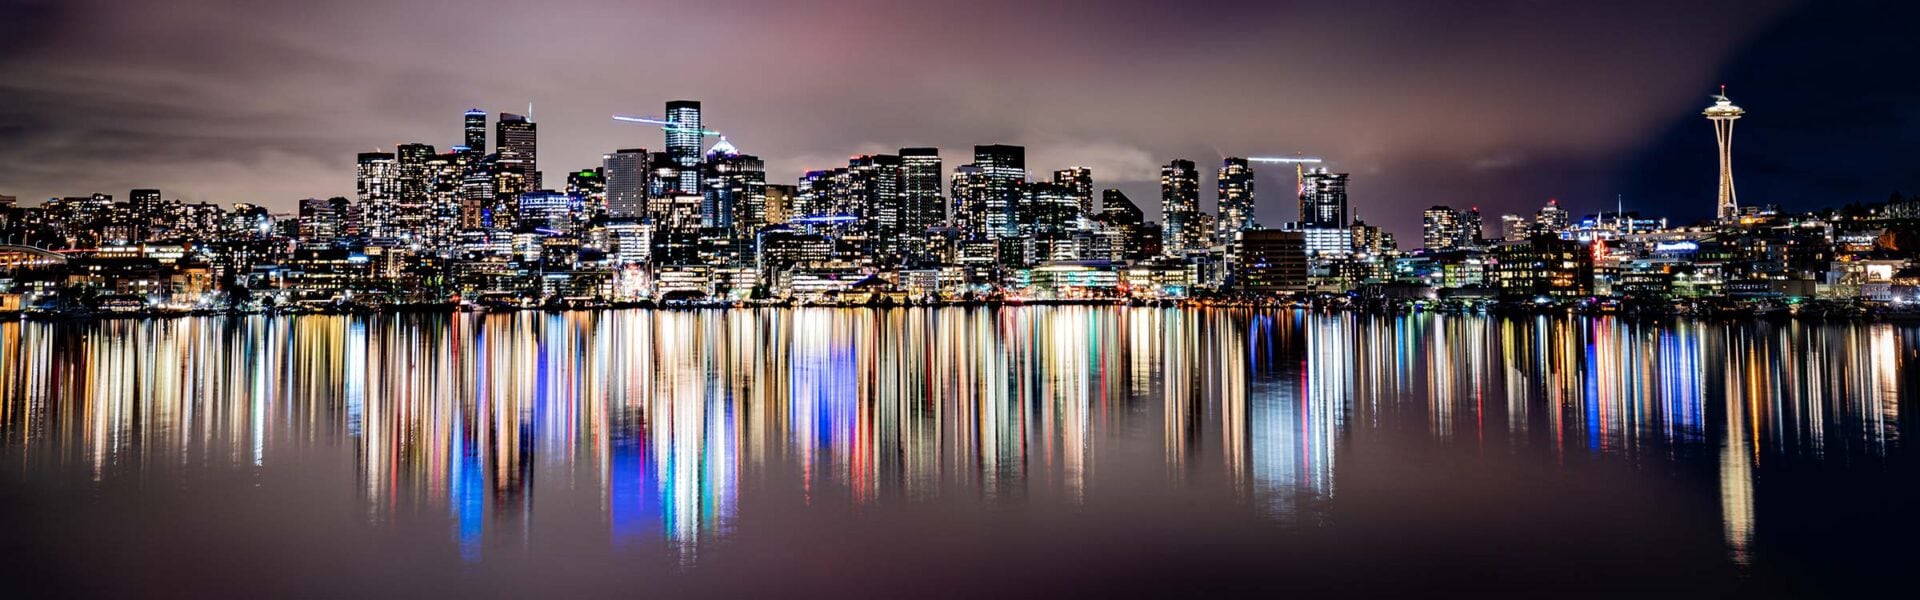 Seattle at night with the lights reflecting off of the water.